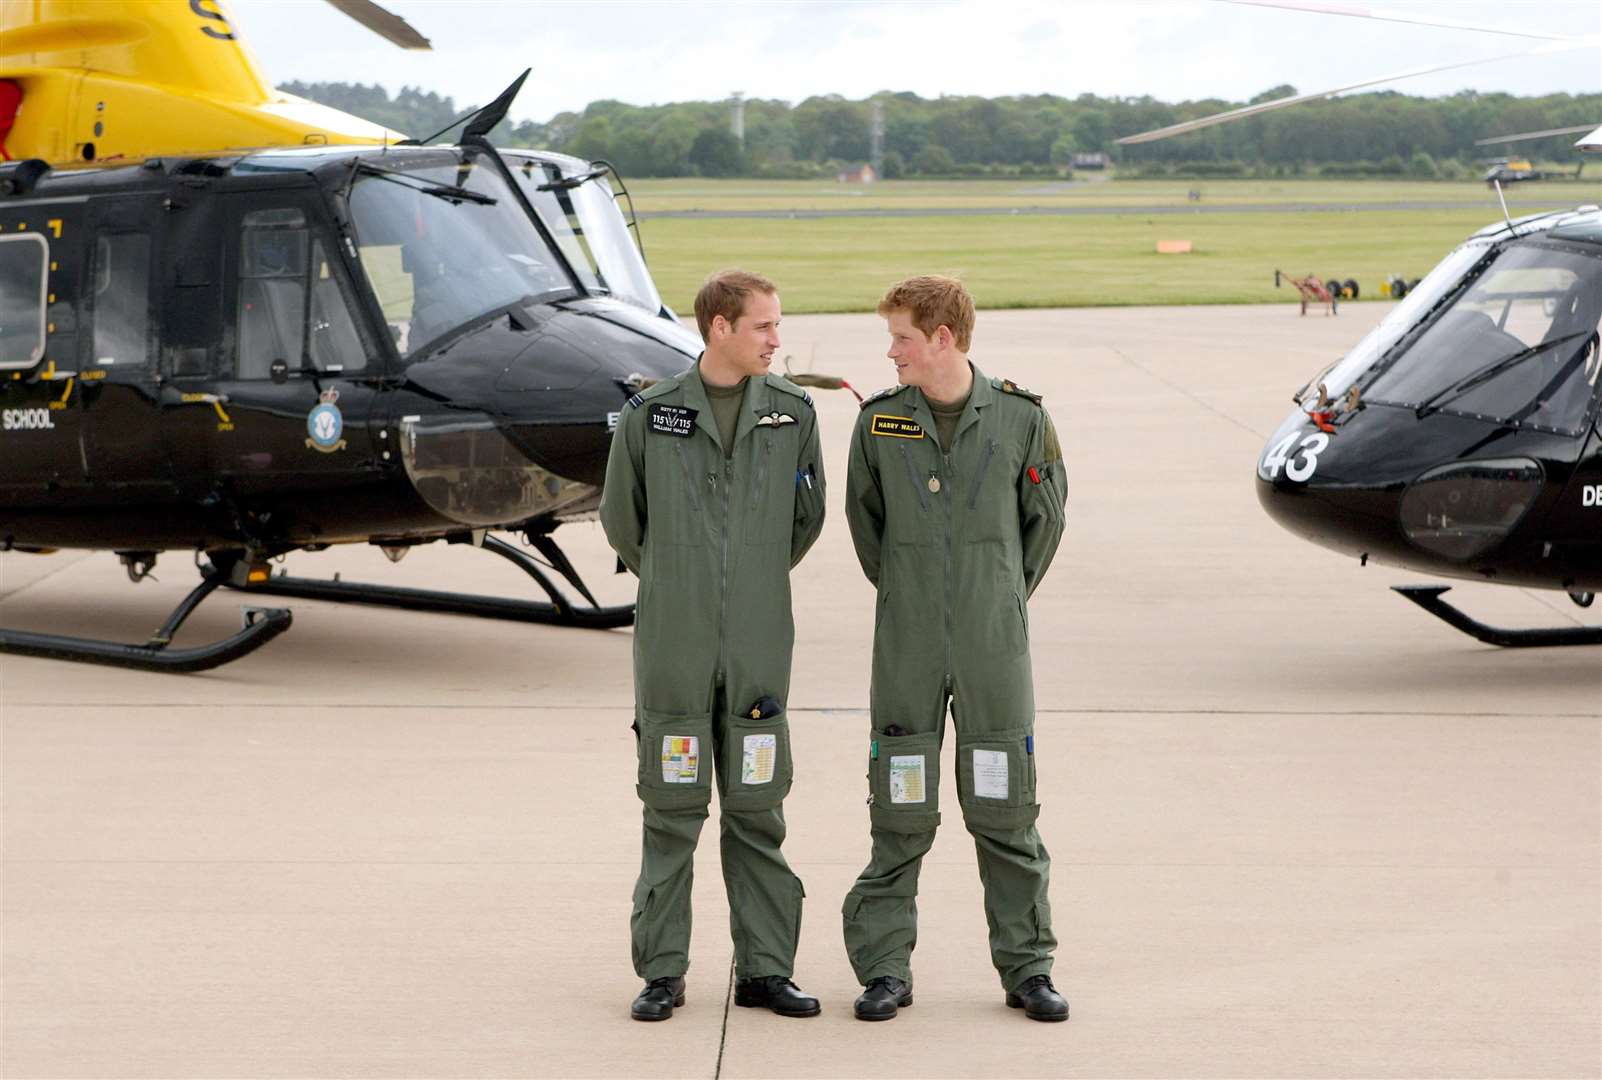 William and Harry during a photo call at their military helicopter training course base at RAF Shawbury (Dave Thompson/PA)